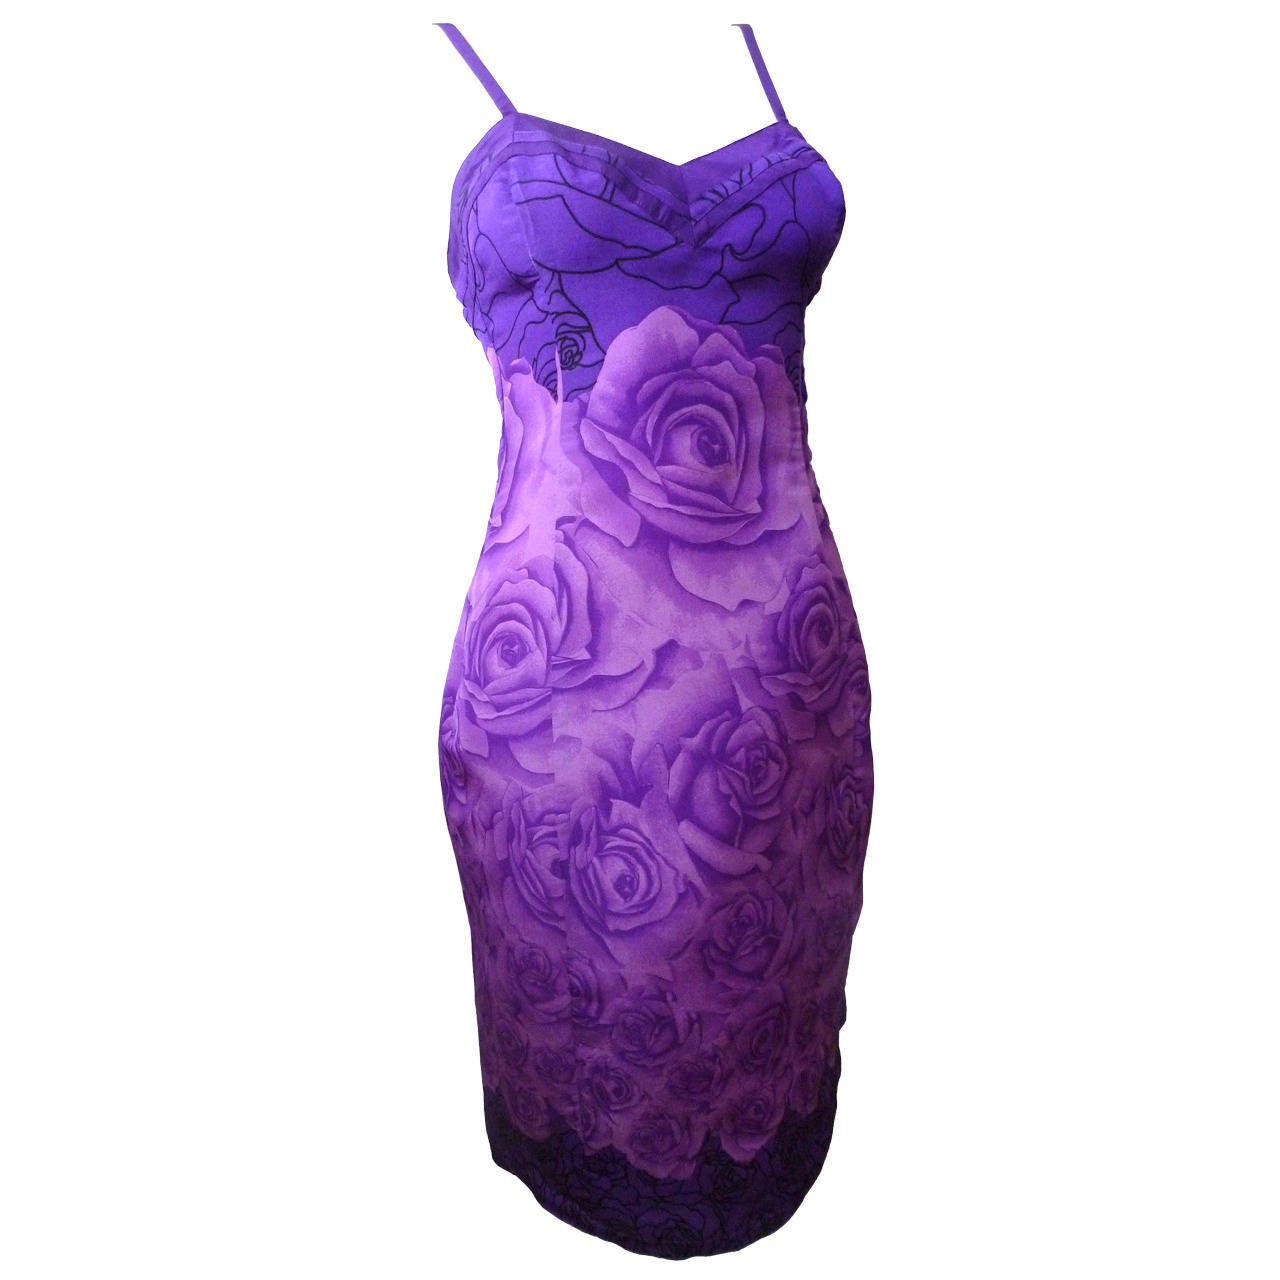 Rare Gianni Versace Rose Printed Silk Cocktail Dress Spring 1988 For Sale